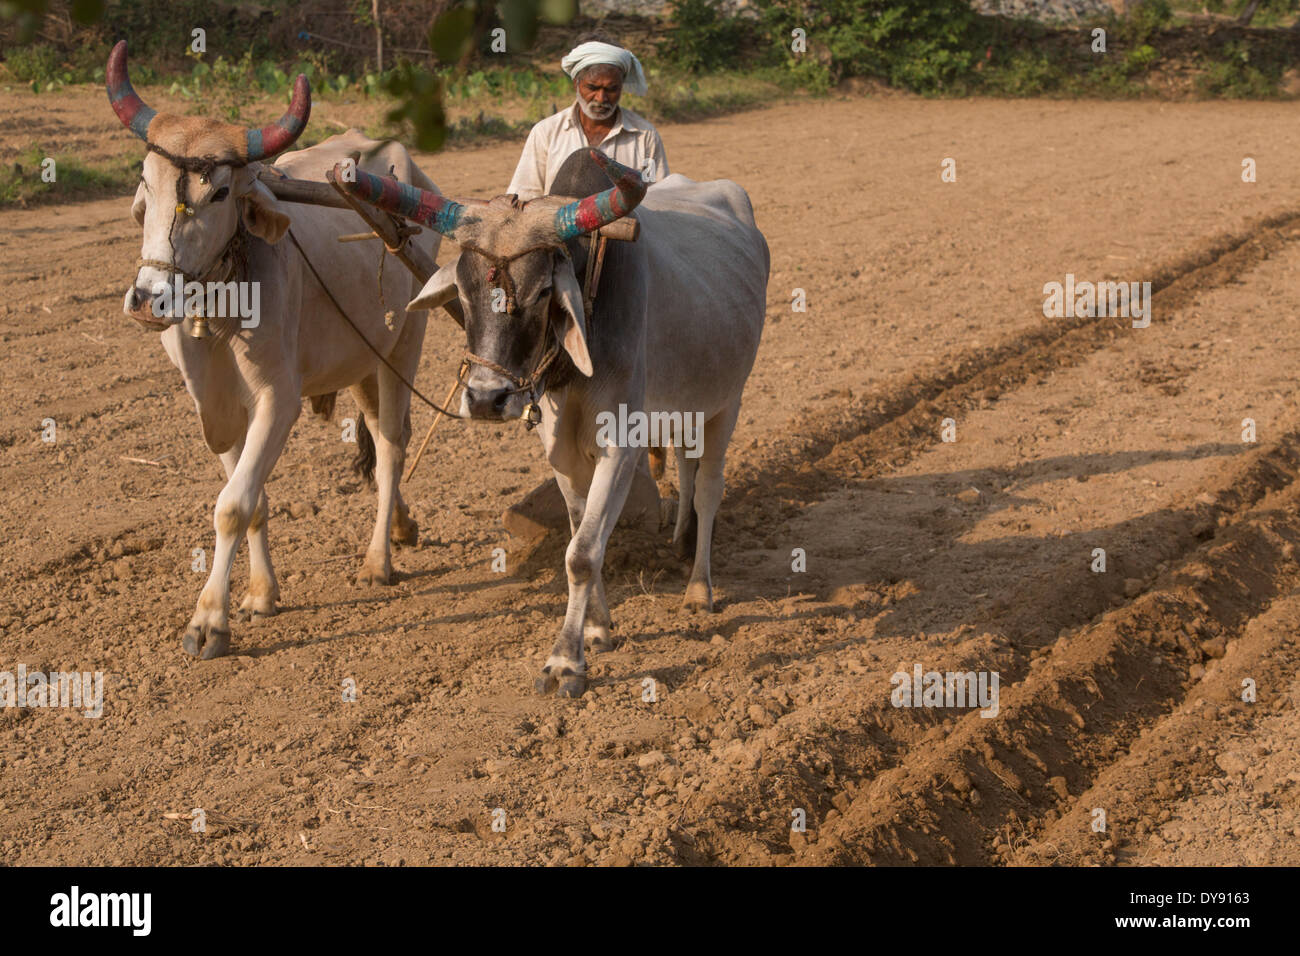 Agriculture, India, Asia, India, agriculture, farmer, plow, cows, Stock Photo